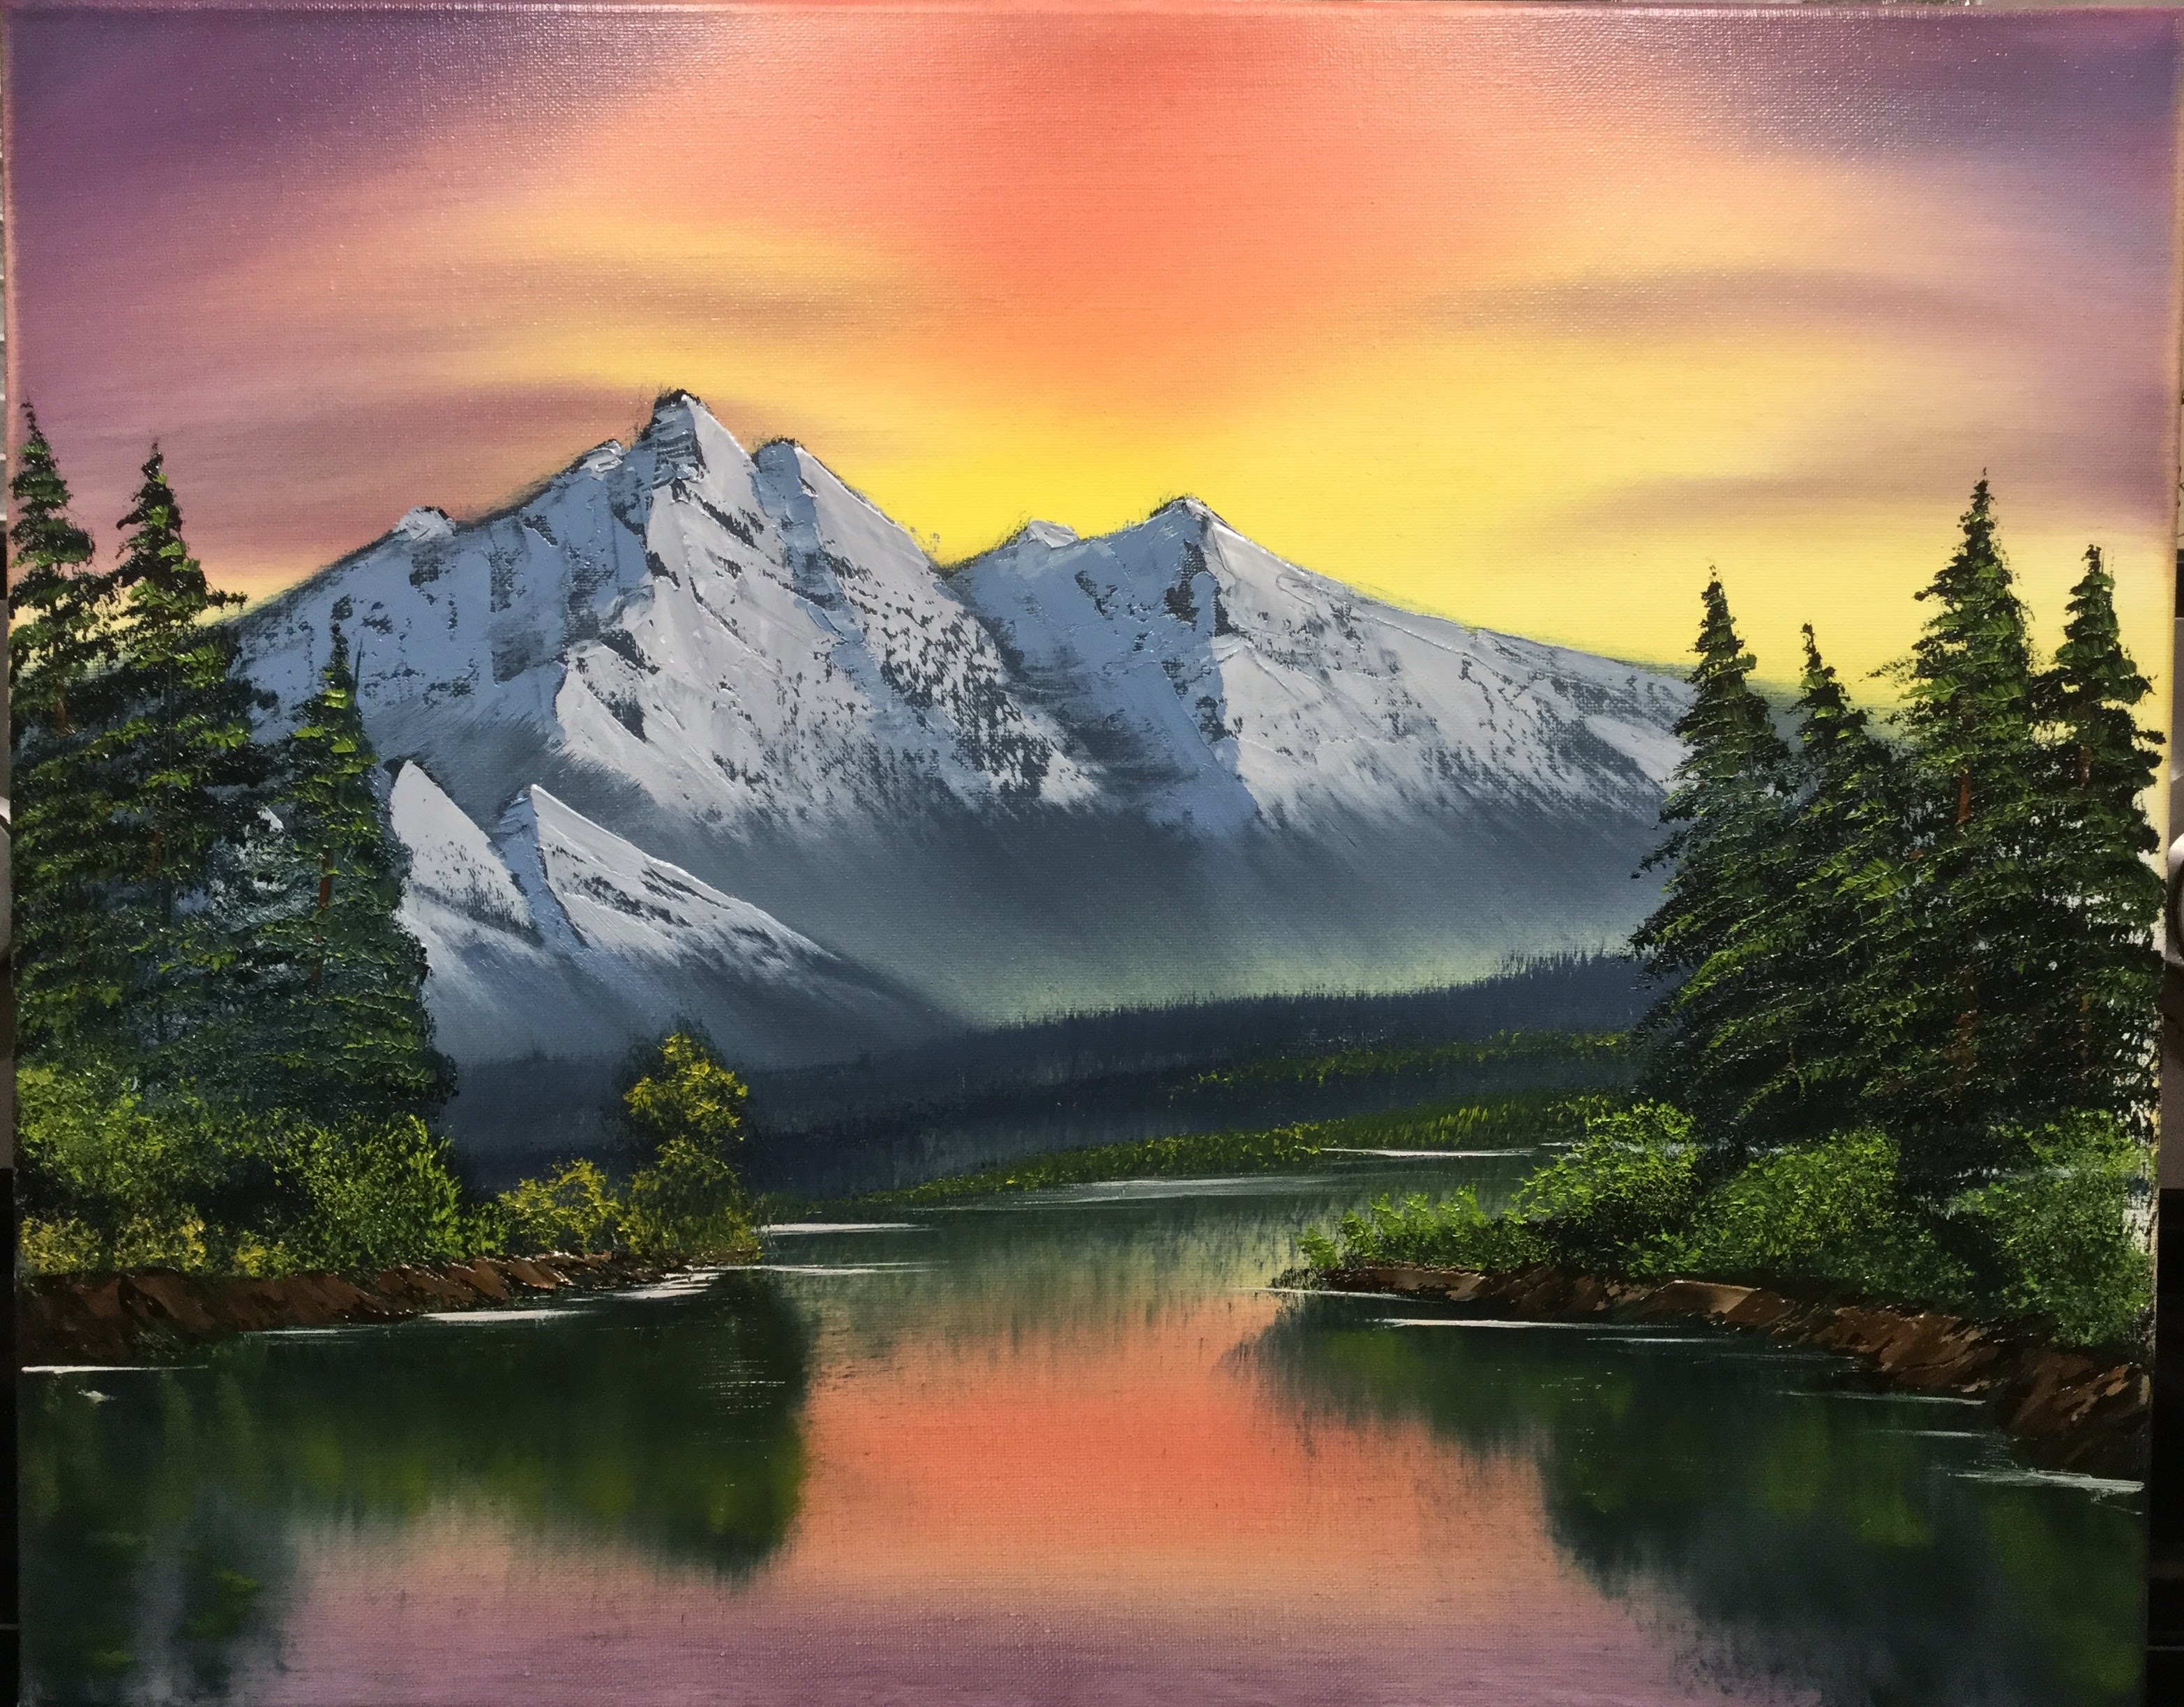 Gray Mountain. Painting #42. Vibrant Sky, Majestic Mountain, and Lush